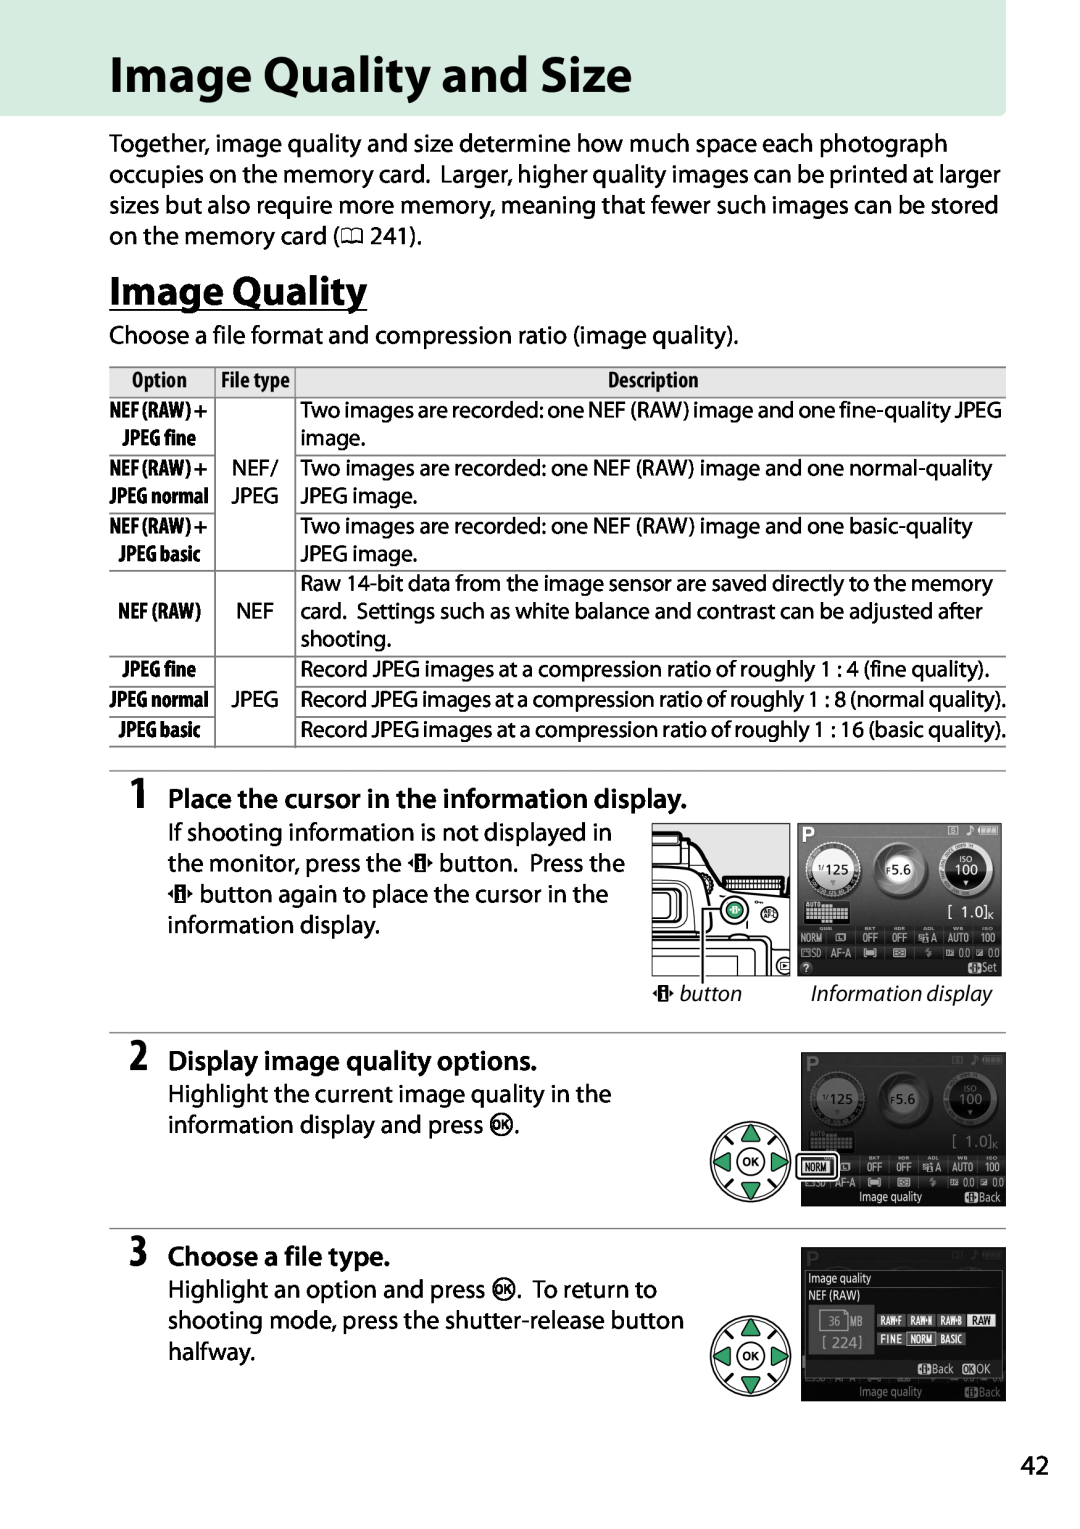 Nikon 1503, D5200 18105mm Kit, 1501, 1507, 1511 Image Quality and Size, Display image quality options, Choose a file type 